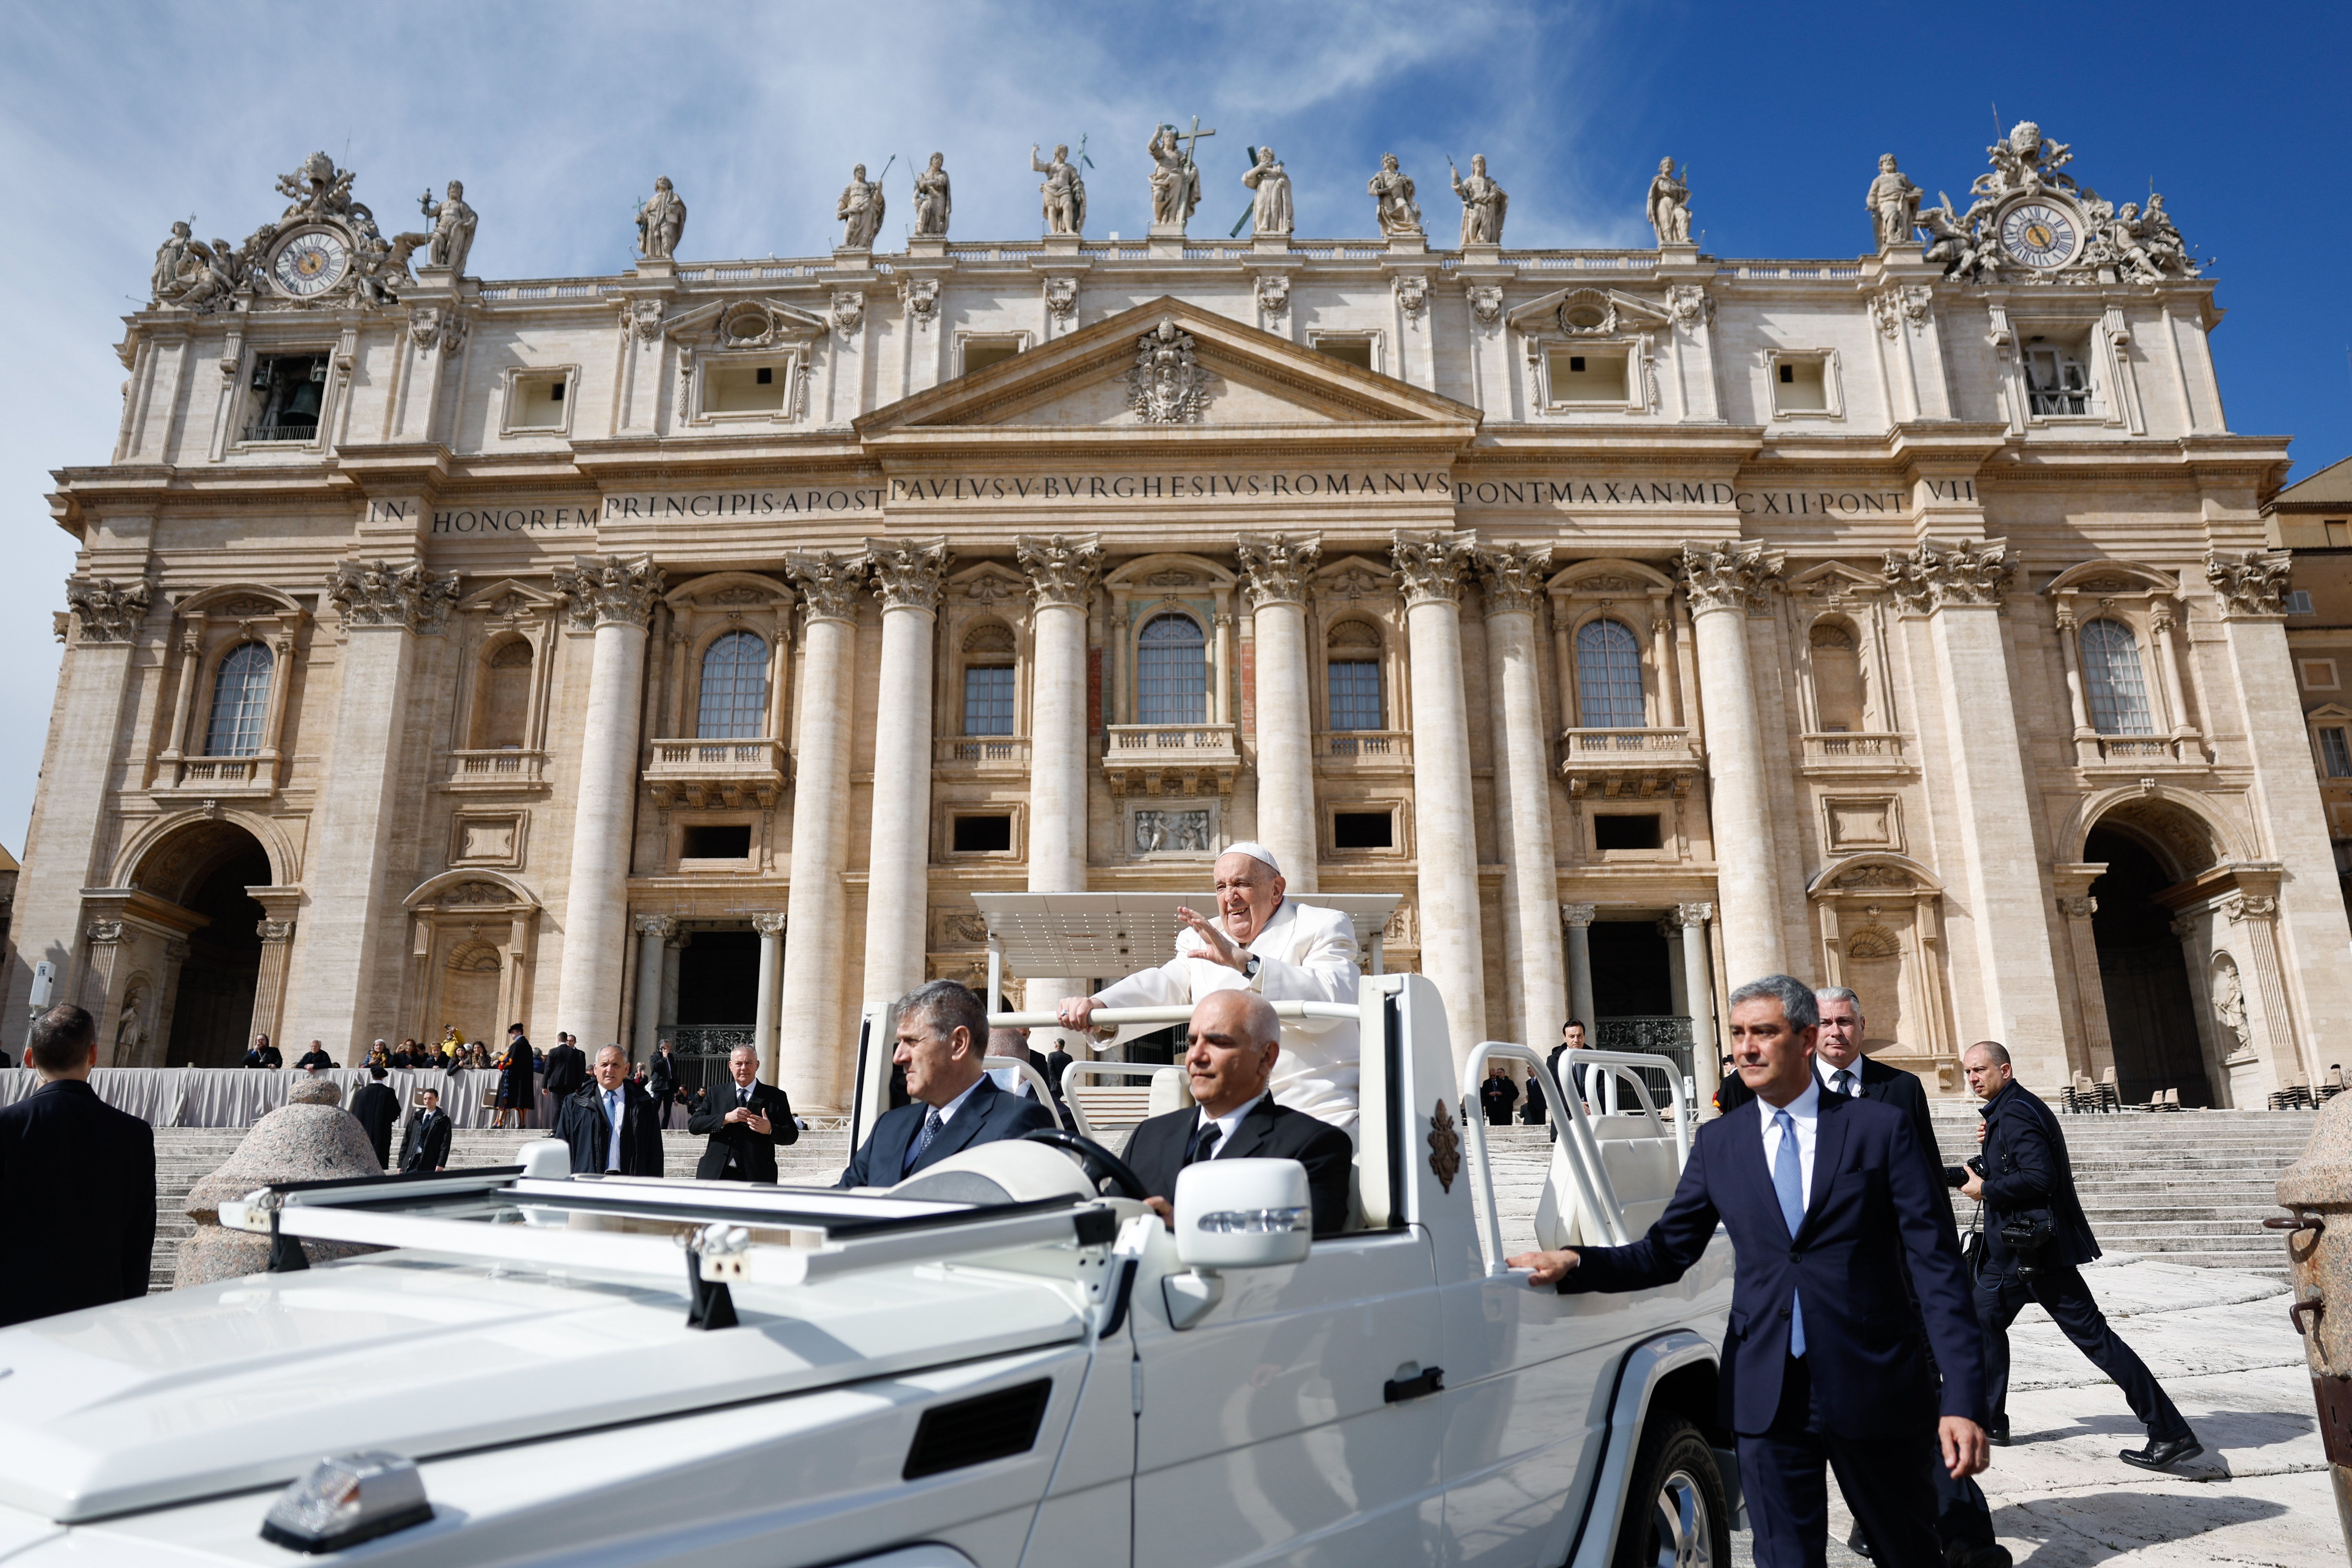 Pope Francis rides the popemobile in St. Peter's Square.